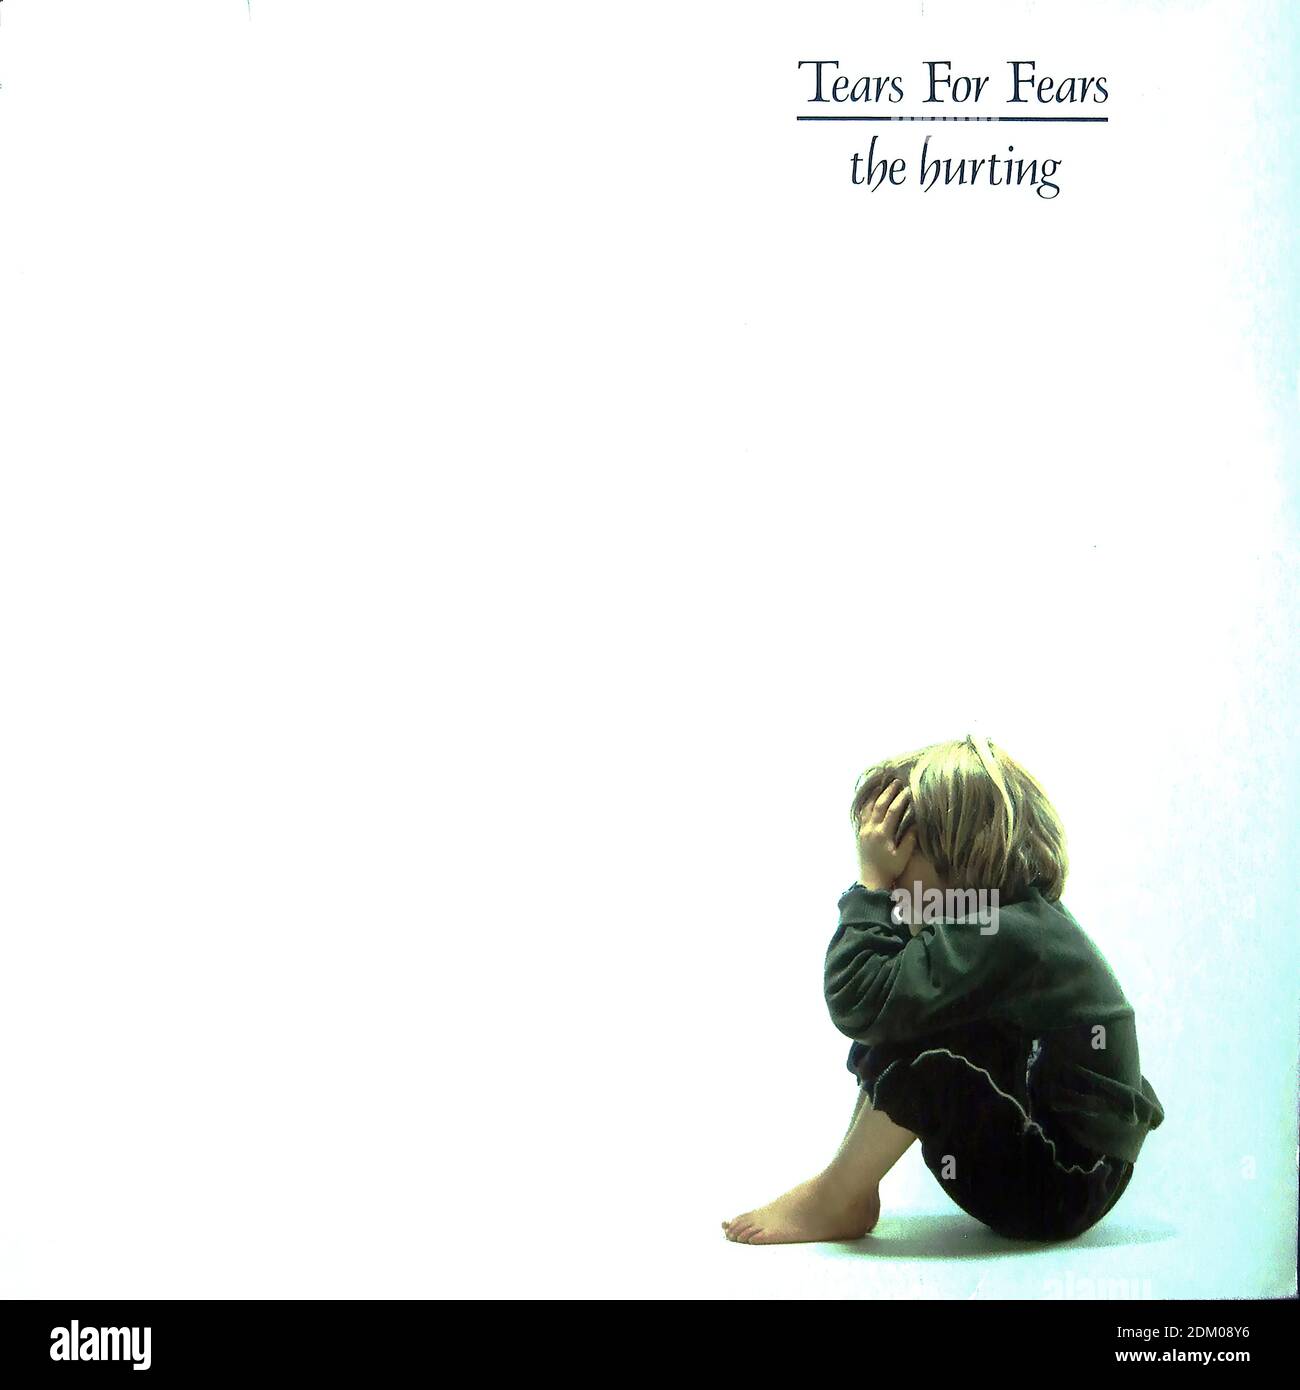 Tears For Fears - The Hurting - Vintage vinyl album cover Stock Photo -  Alamy